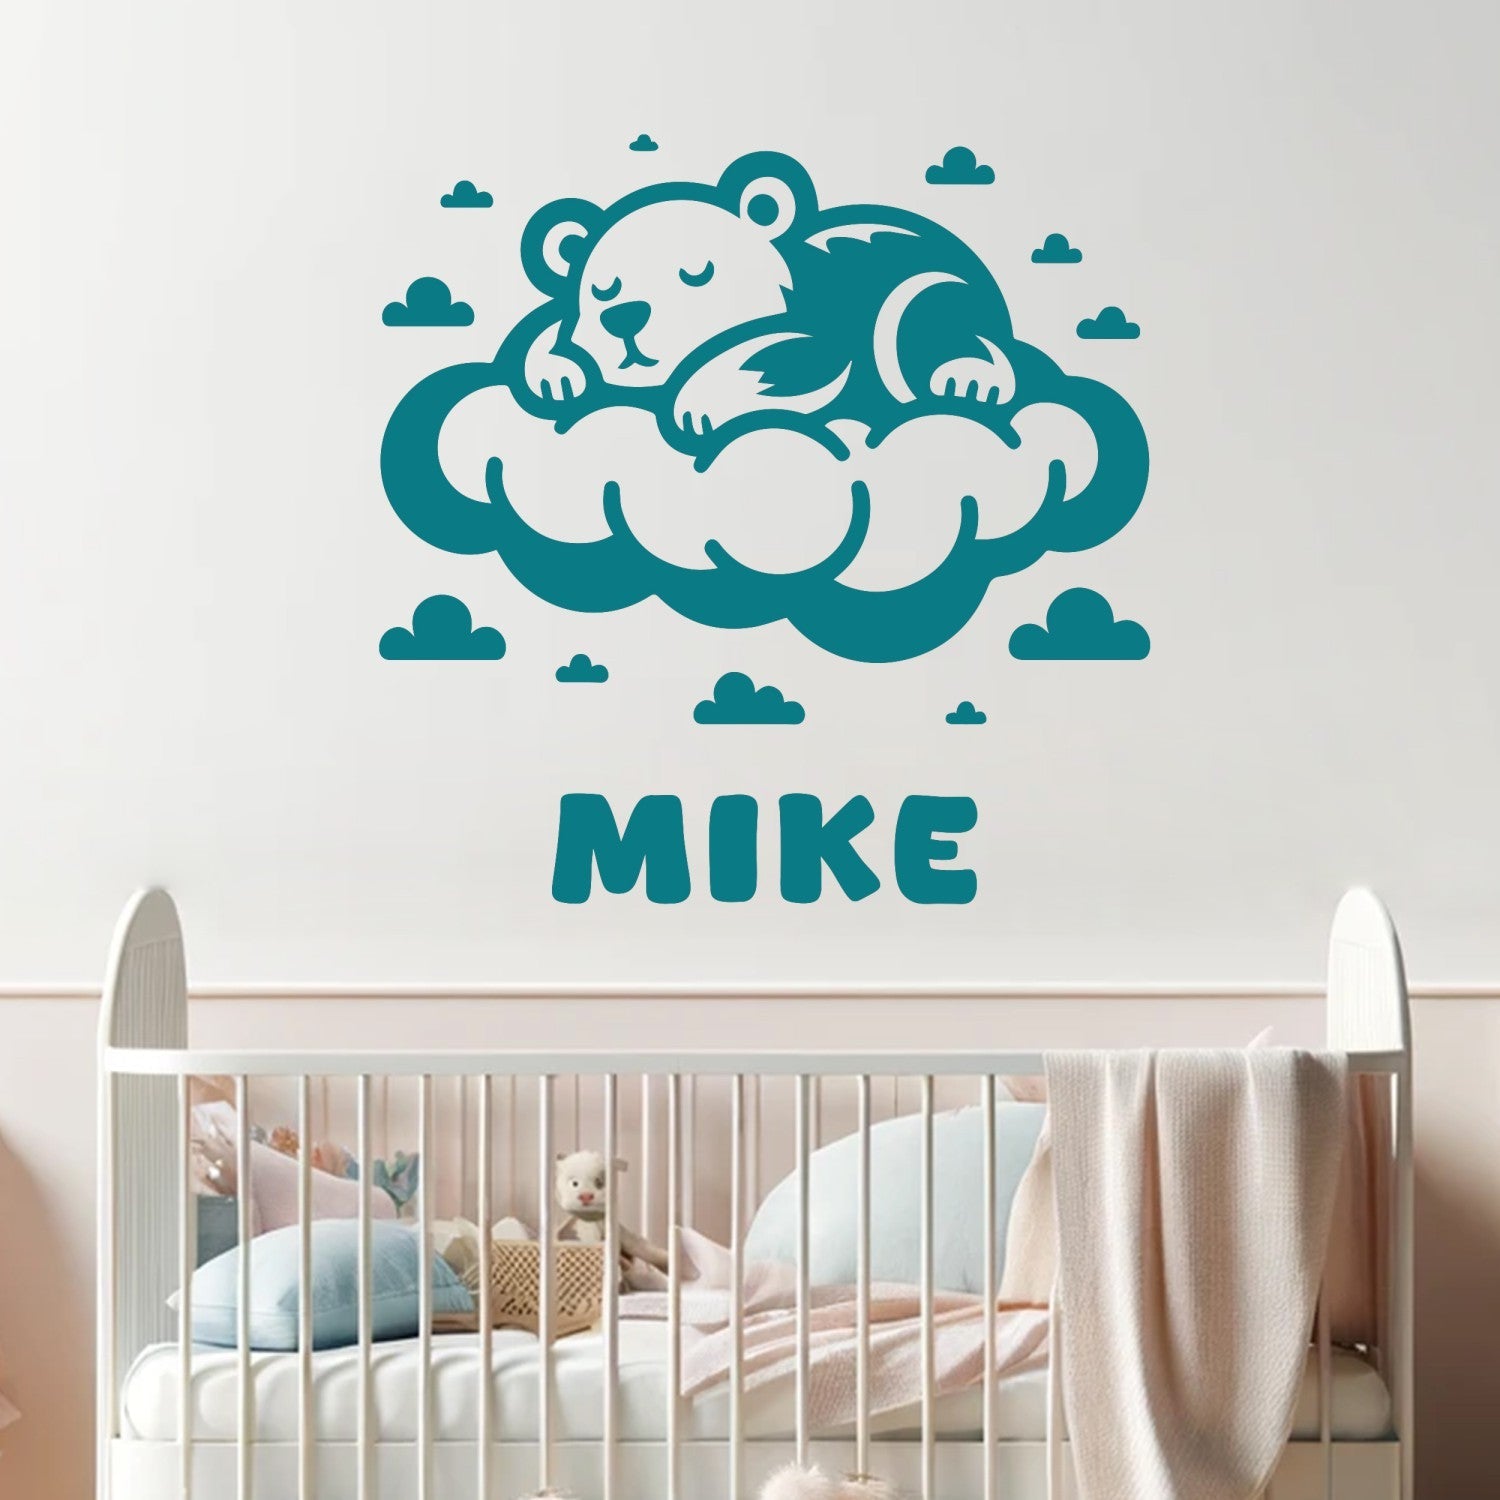 Owl Nursery Wall Decals - Personalized Name Decal - Wall Decals for Kids - Name Customized Wall Decor - Owl Stickers Kids Wall - Owl Wall Decal for Kids